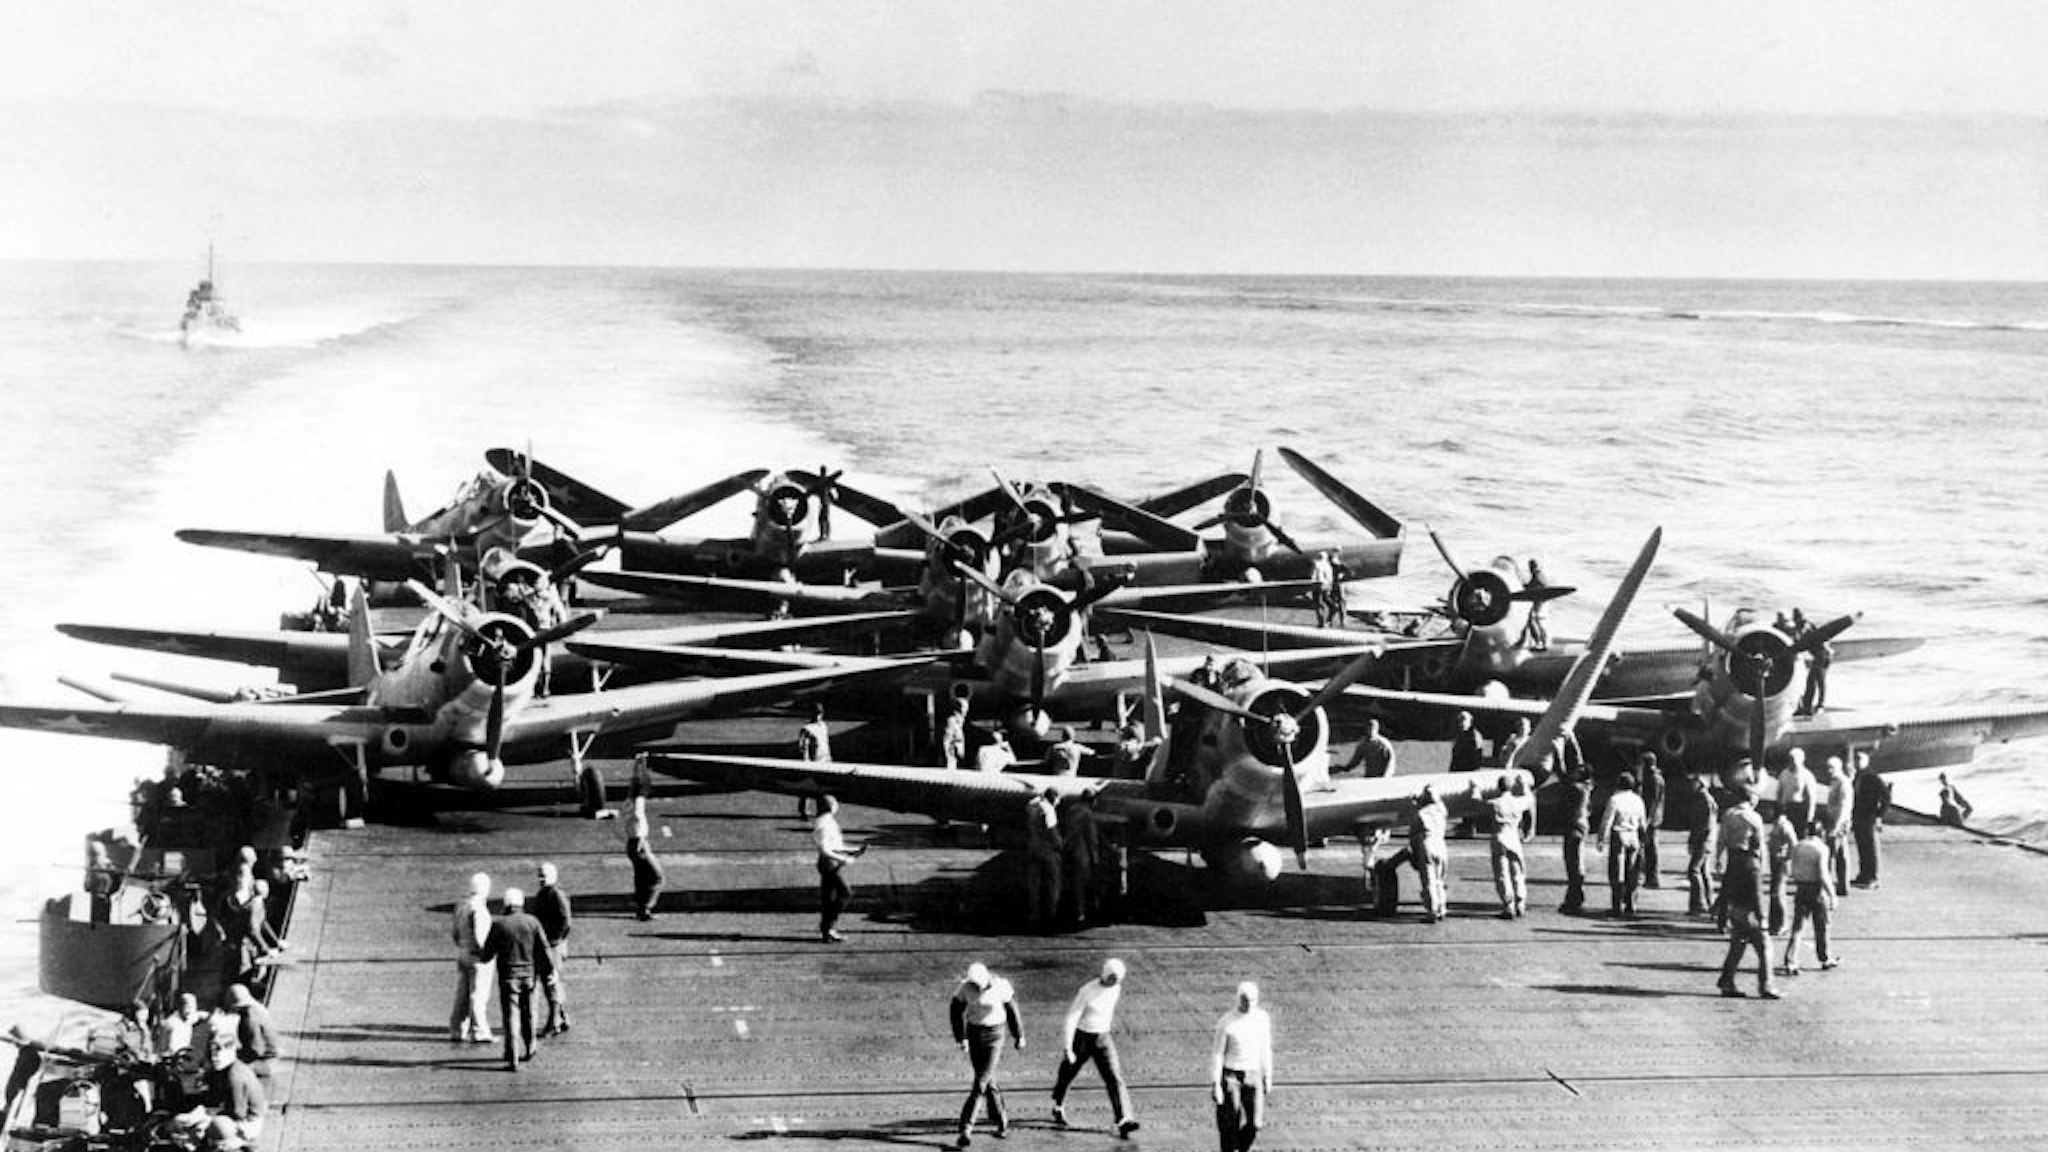 USA/Japan: TBD-1 torpedo bombers on the deck of USS Enterprise before launching an attack against four Japanese carriers in the Battle of Midway, 4 June, 1942. The squadron lost ten of fourteen aircraft during the attack. (Photo by: Pictures from History/Universal Images Group via Getty Images)